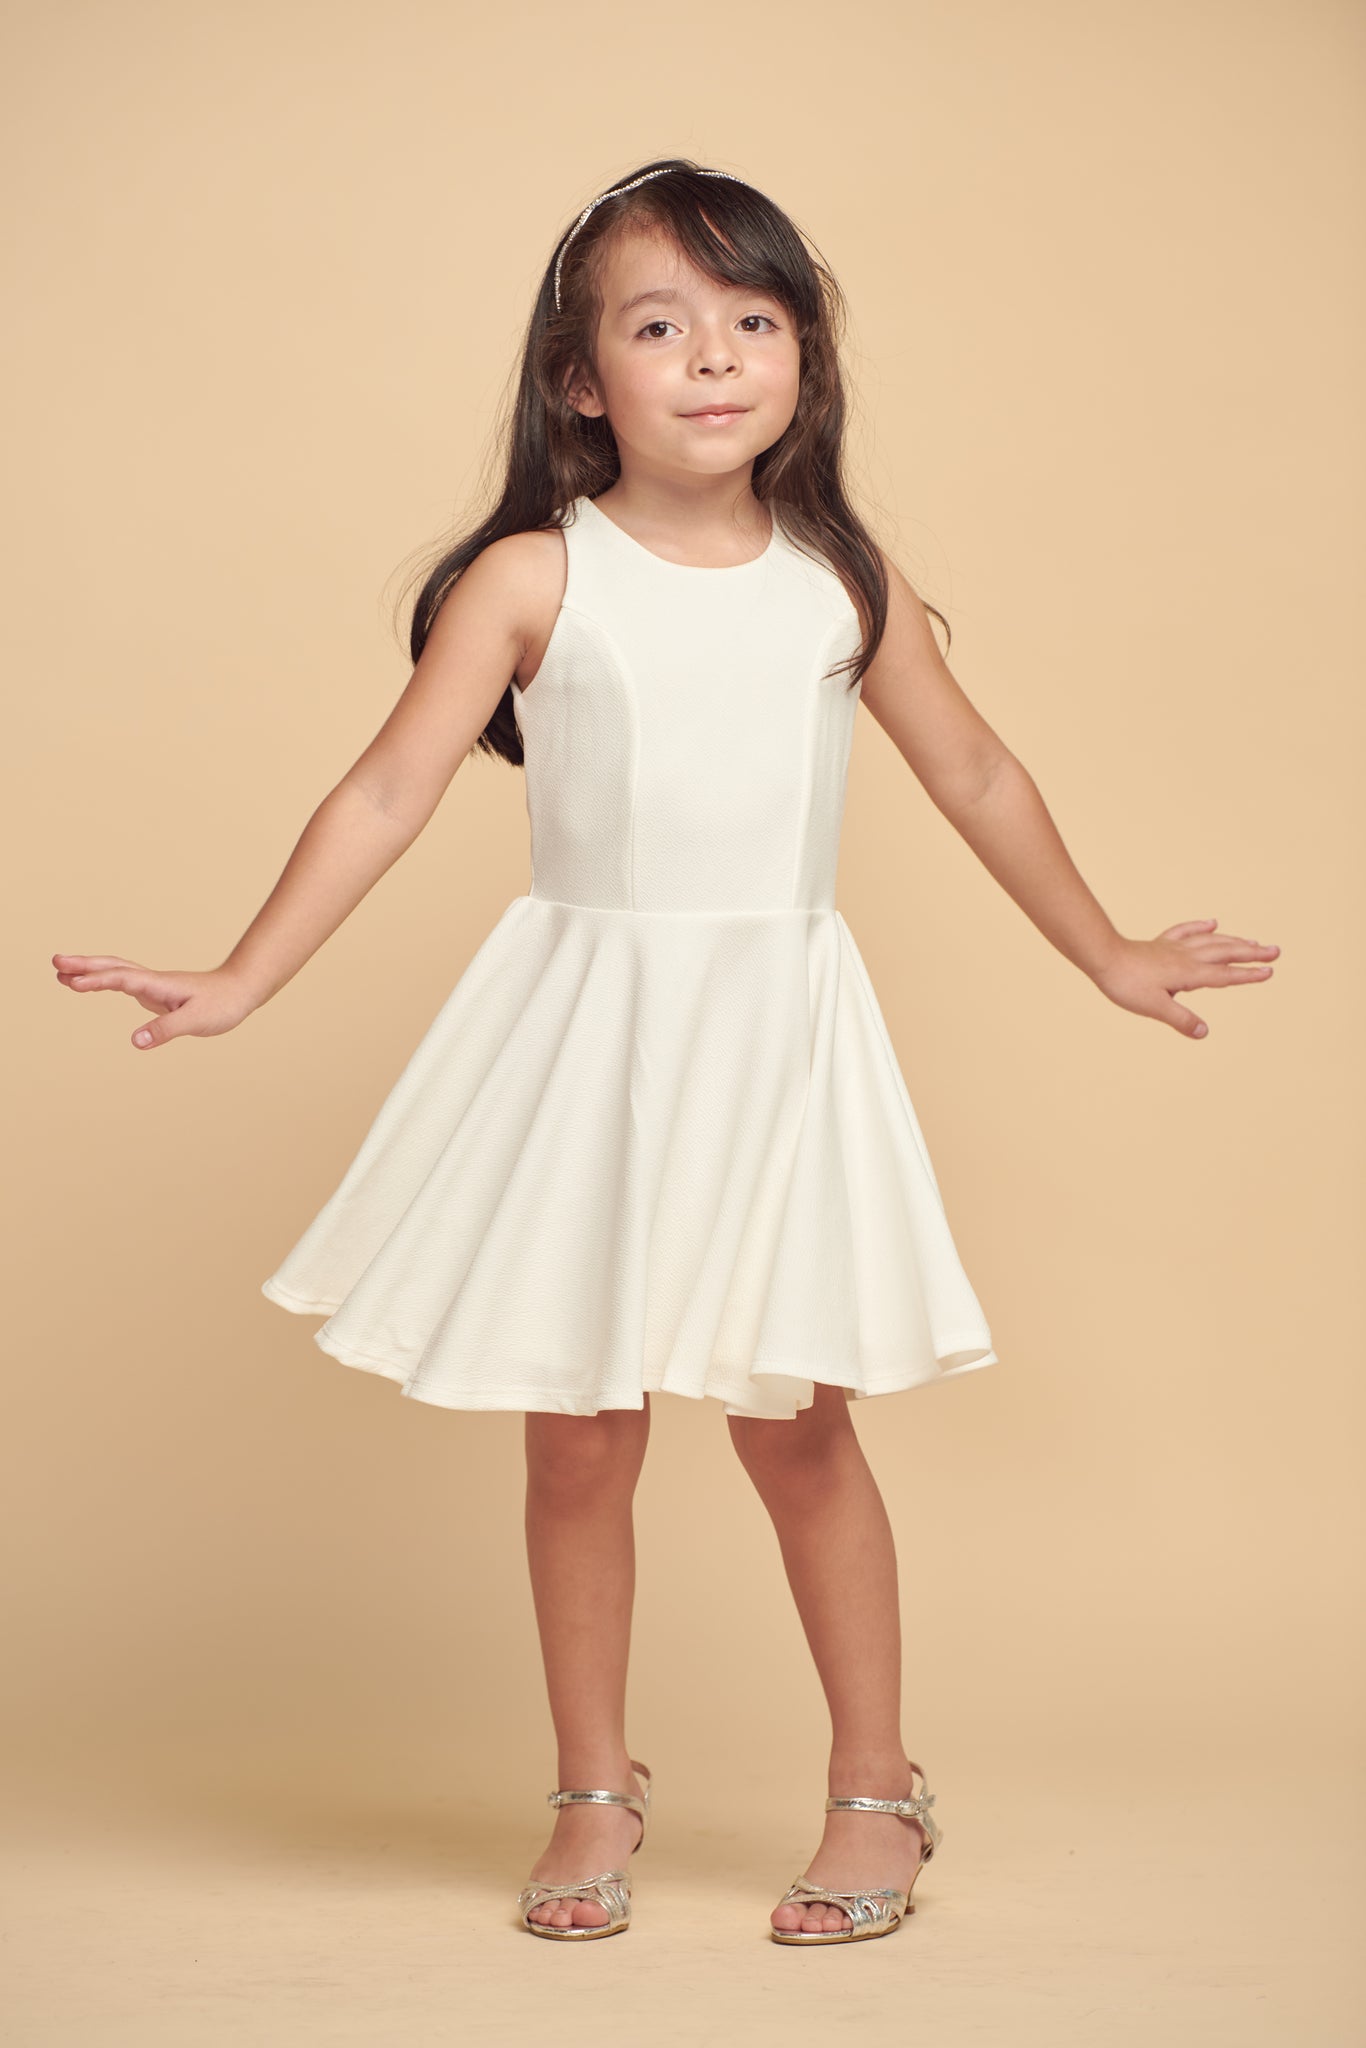 The tank style sleeve textured fit and flare dress is shown in ivory with high neck line, racerback detailing and dart bodice for a chic and sophisticated look. This dress can be worn to a more conservative special occasion event like cotillion, graduation, or religious service like a bat mitzvah service or church ceremony.